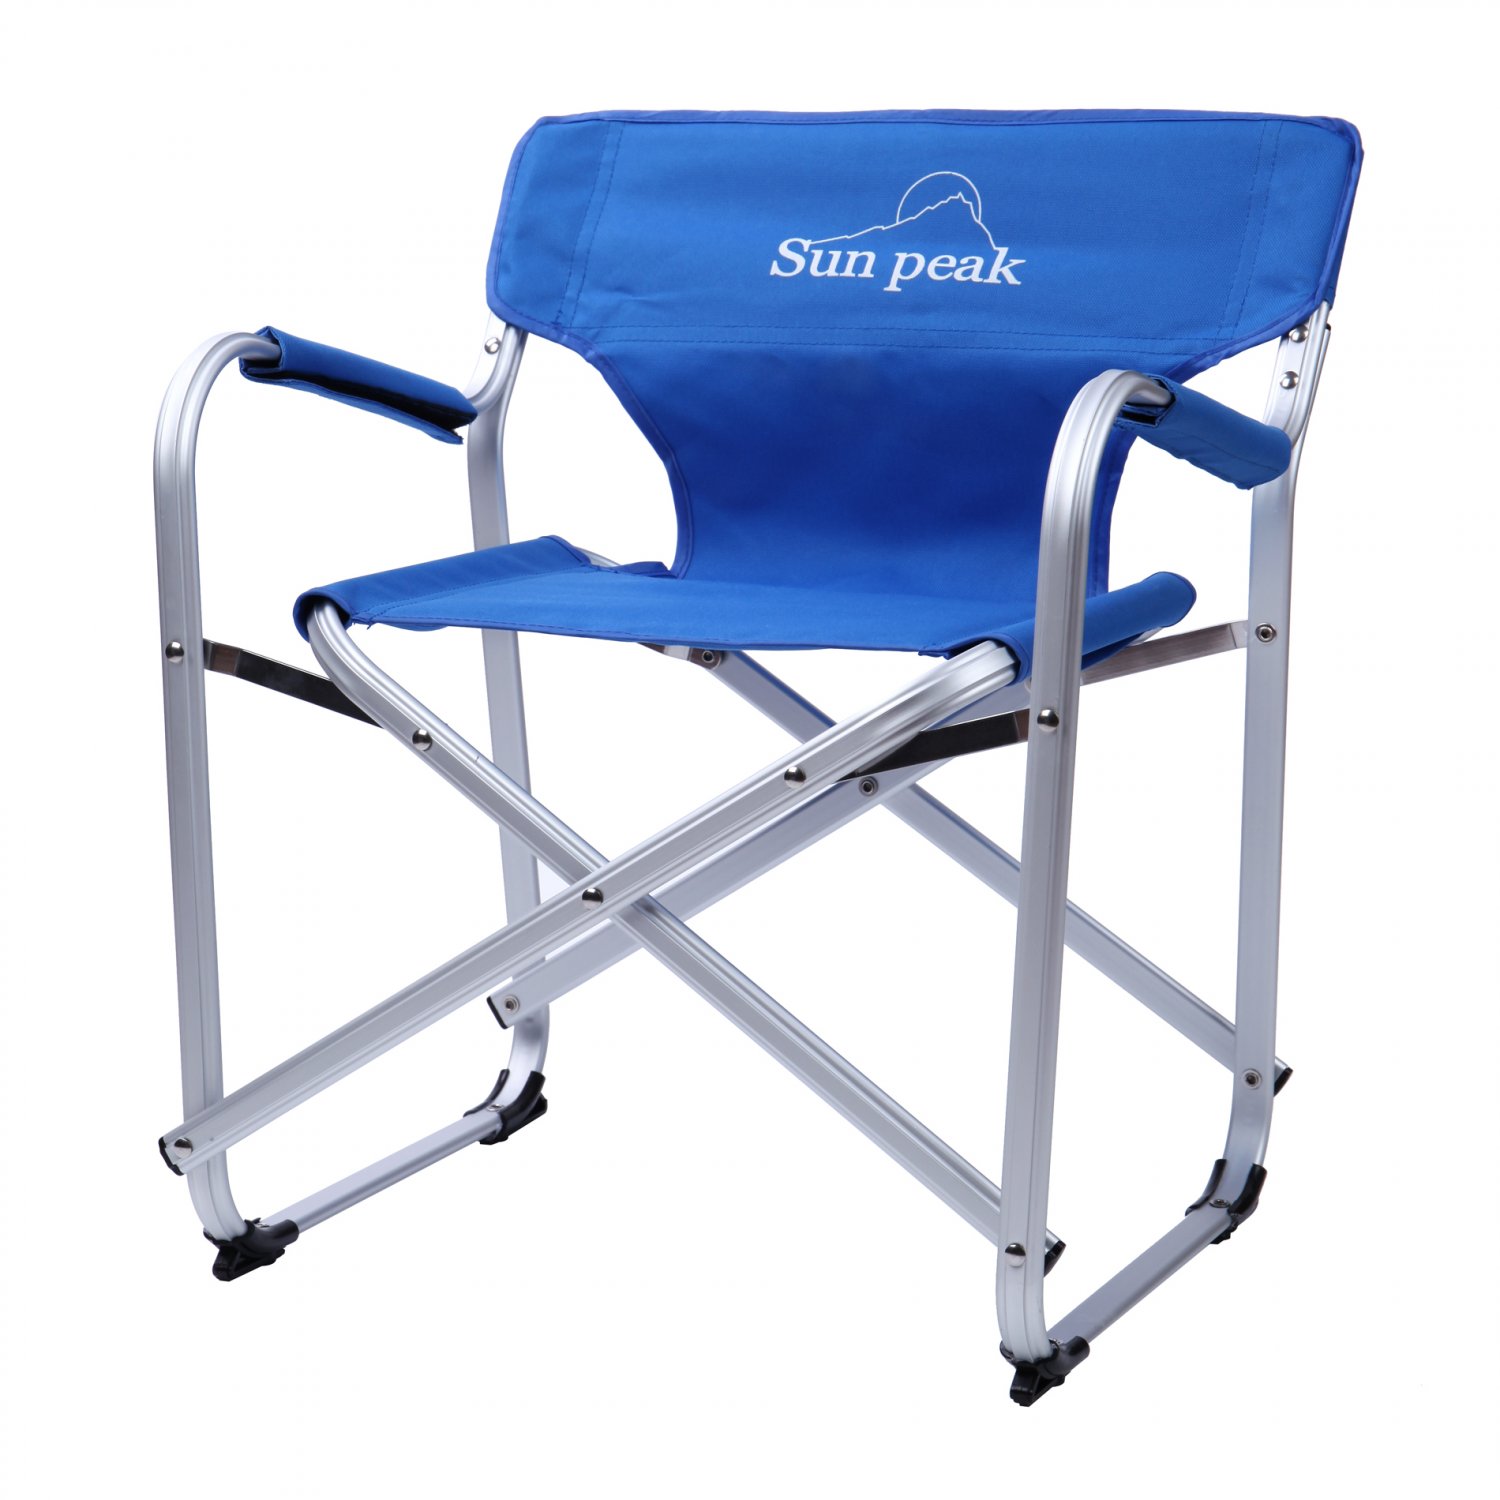 Lightweight Mini Portable Folding Chair Camping Seat W/ Carry Bag Blue